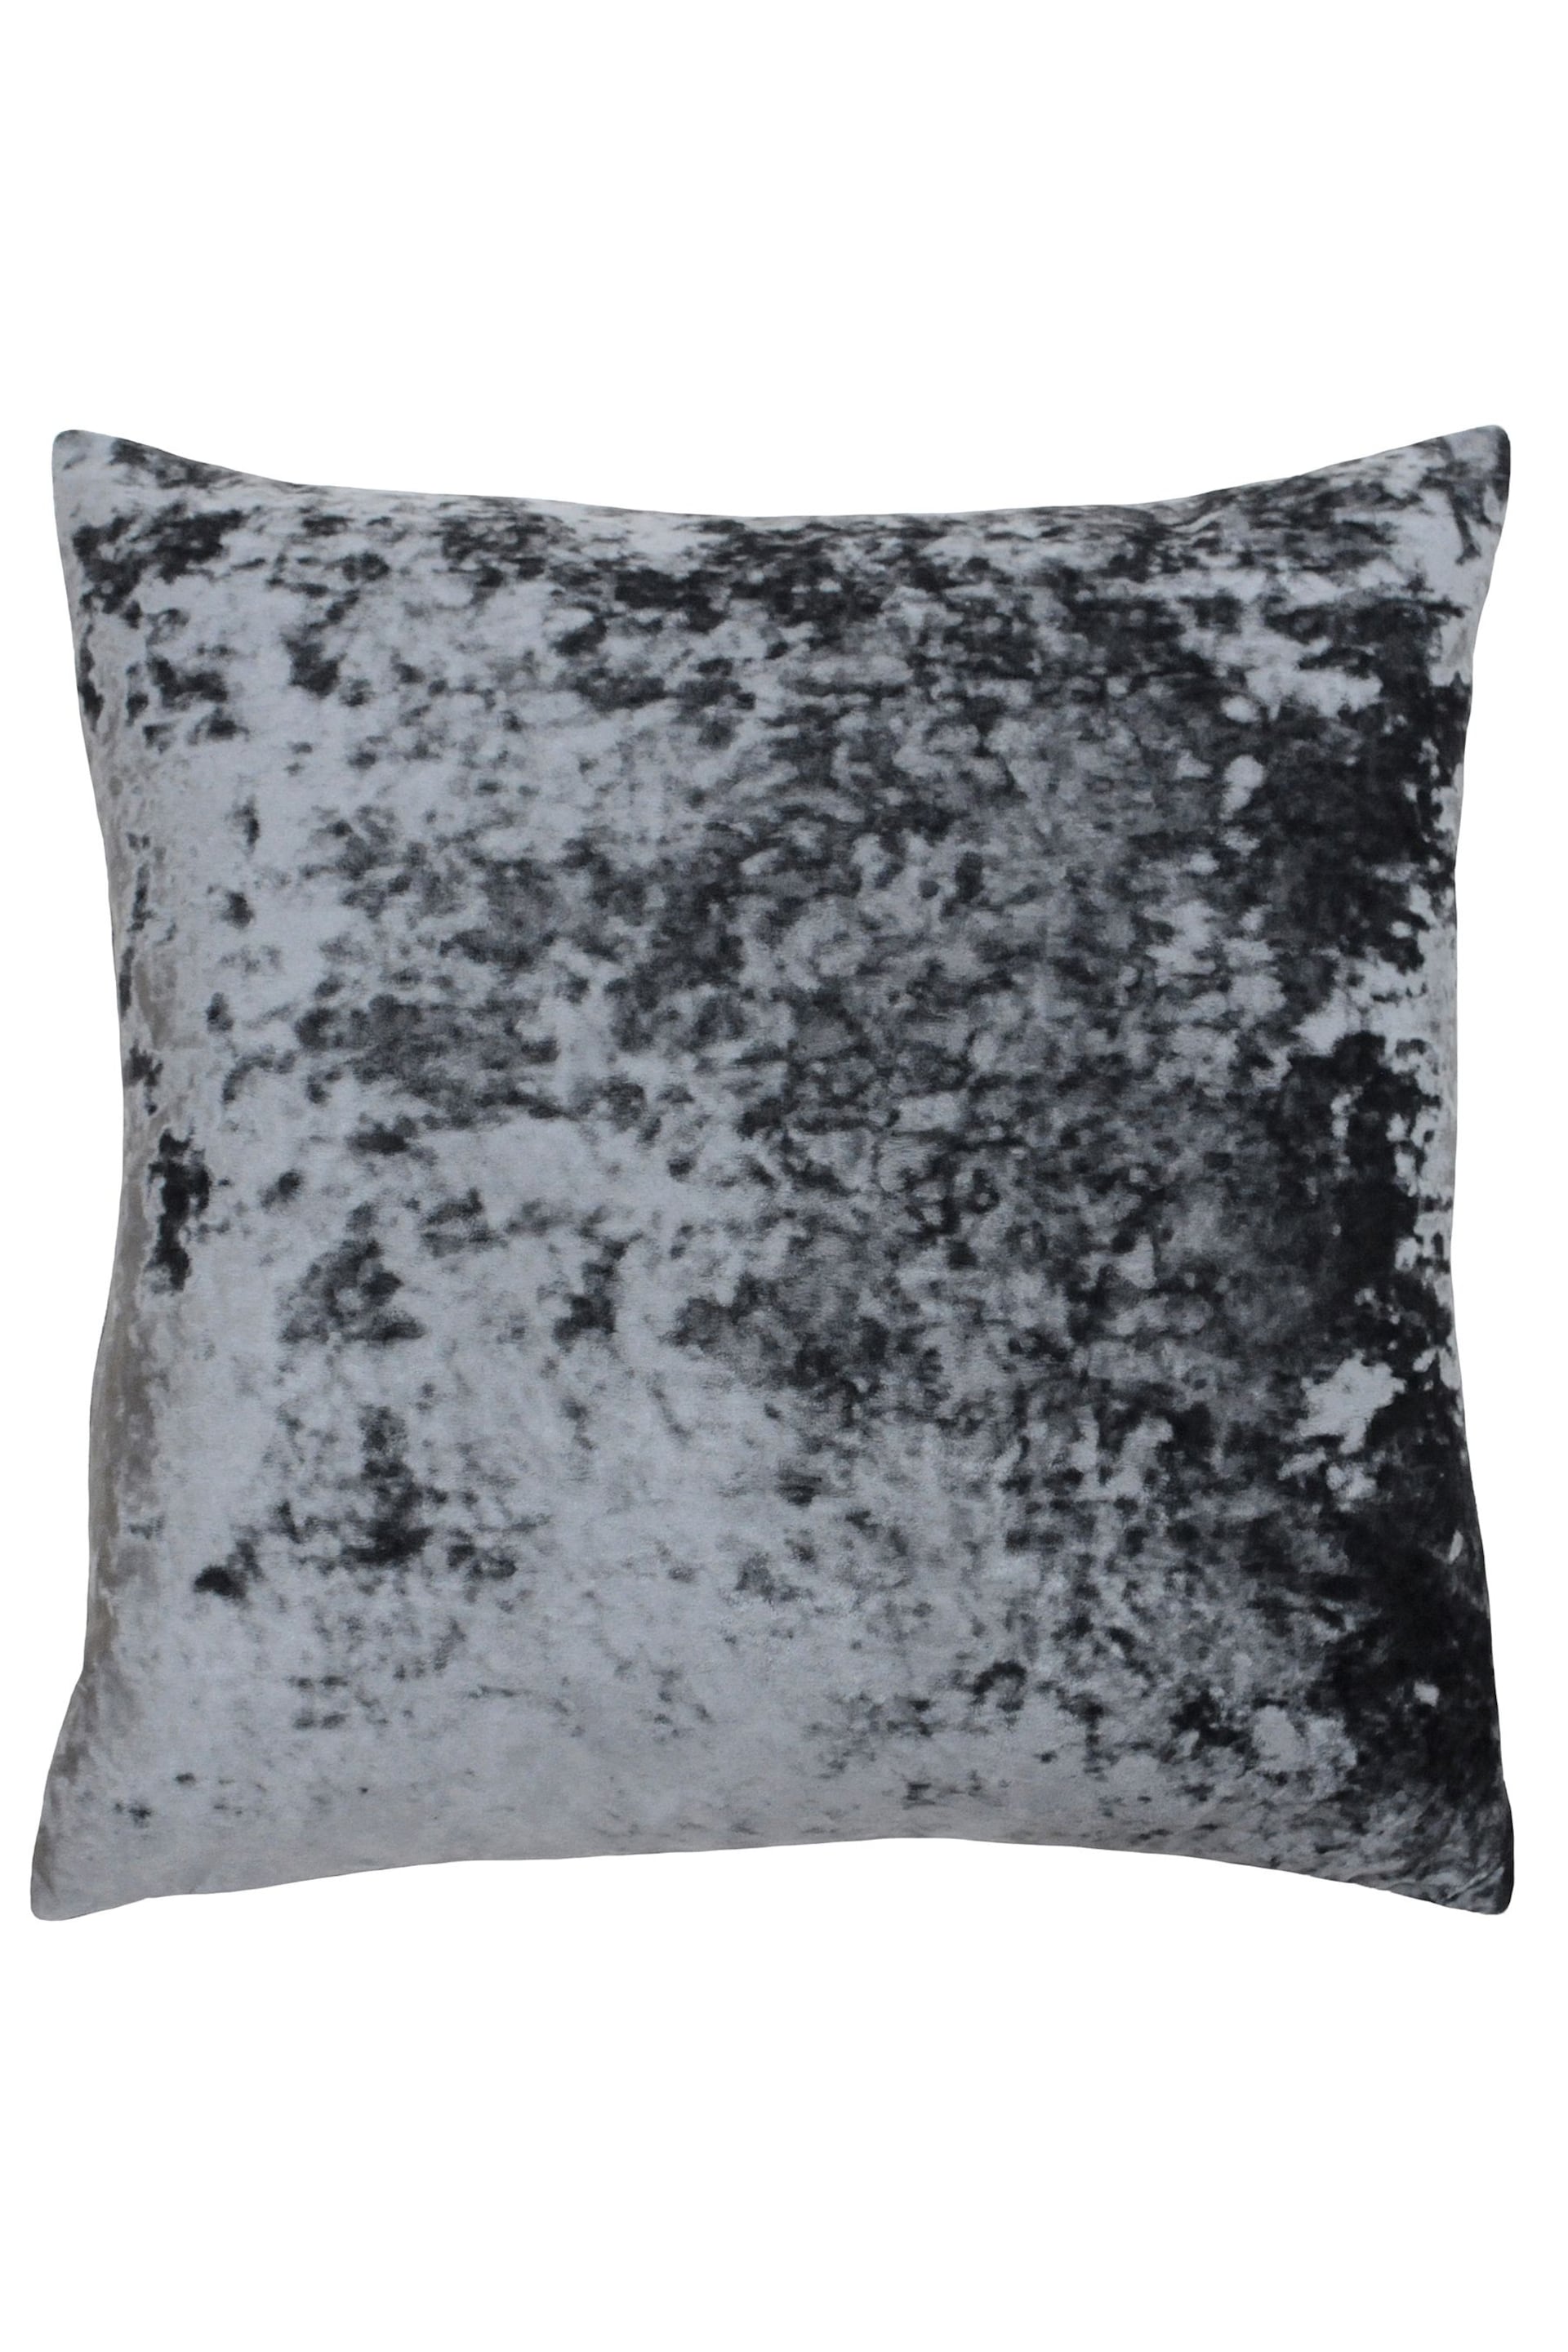 Riva Paoletti Pewter Grey Verona Crushed Velvet Polyester Filled Cushion - Image 1 of 1